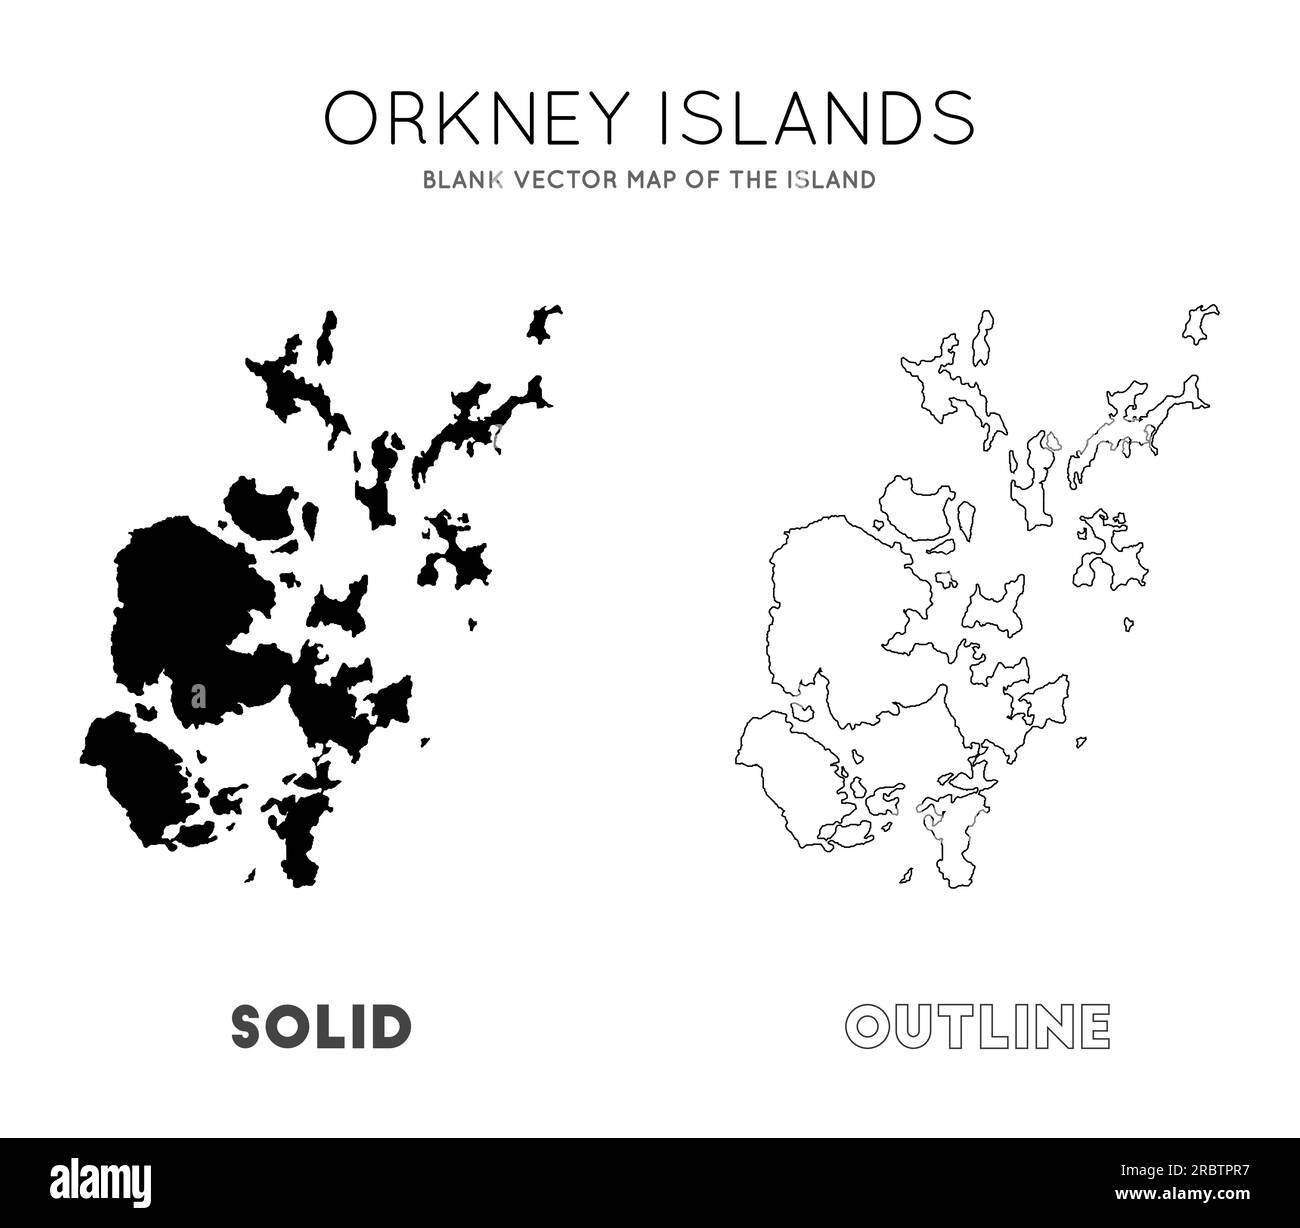 Orkney Islands map. Blank vector map of the Island. Borders of Orkney Islands for your infographic. Vector illustration. Stock Vector